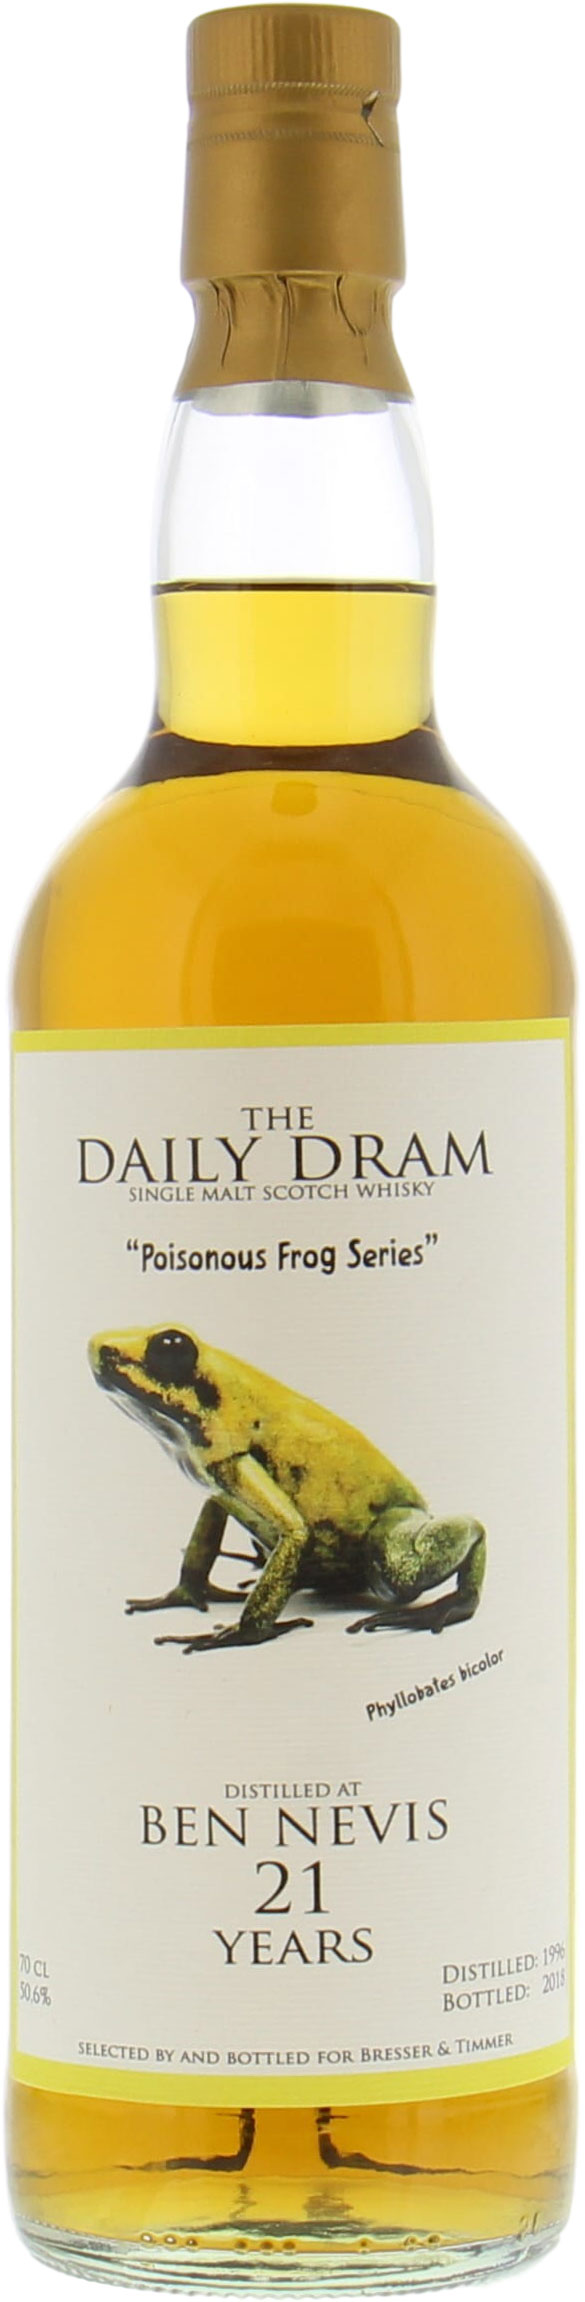 Ben Nevis - Daily Dram 21 Years Old Poisonous Frog 50.6% 1996 Perfect